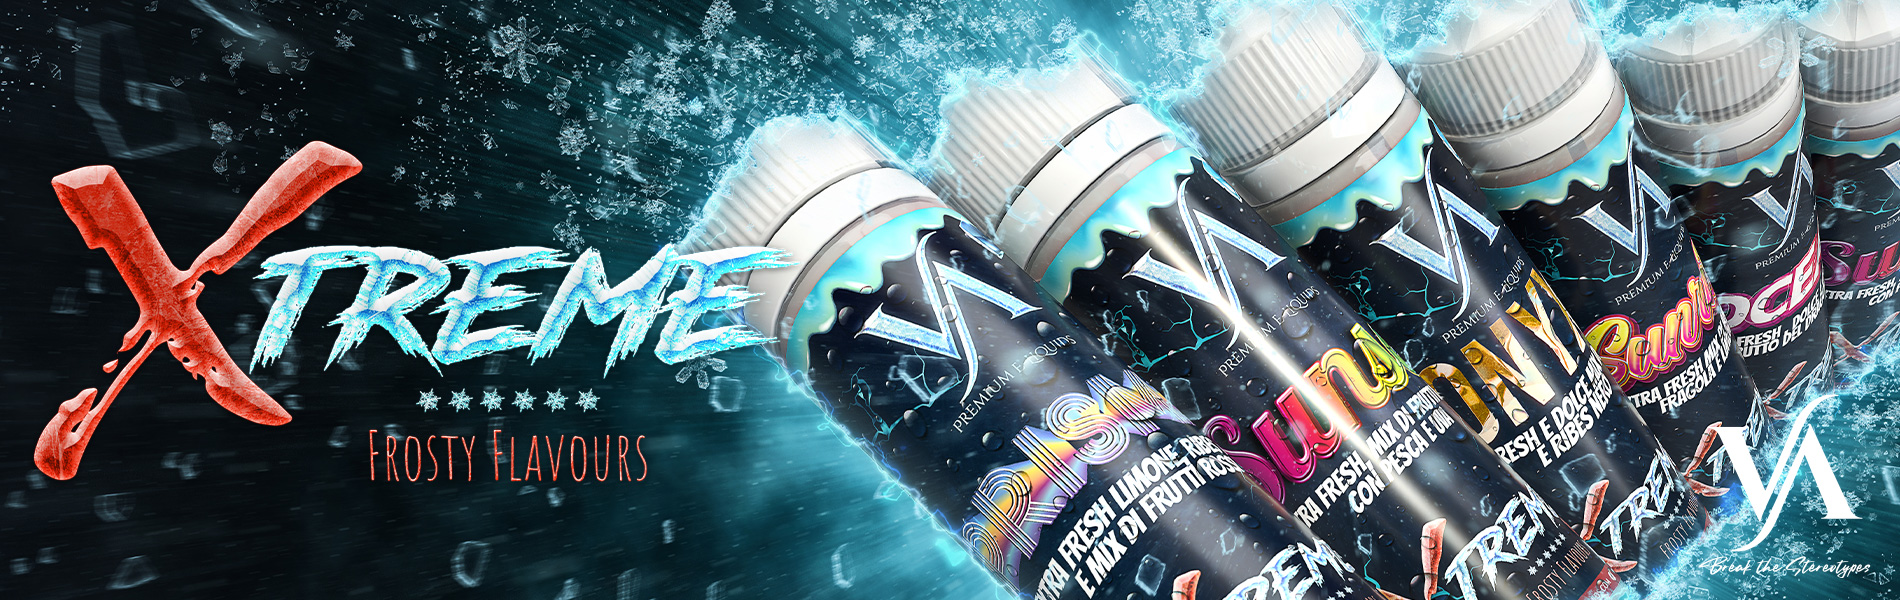 XTREME ICE FLAVOURS